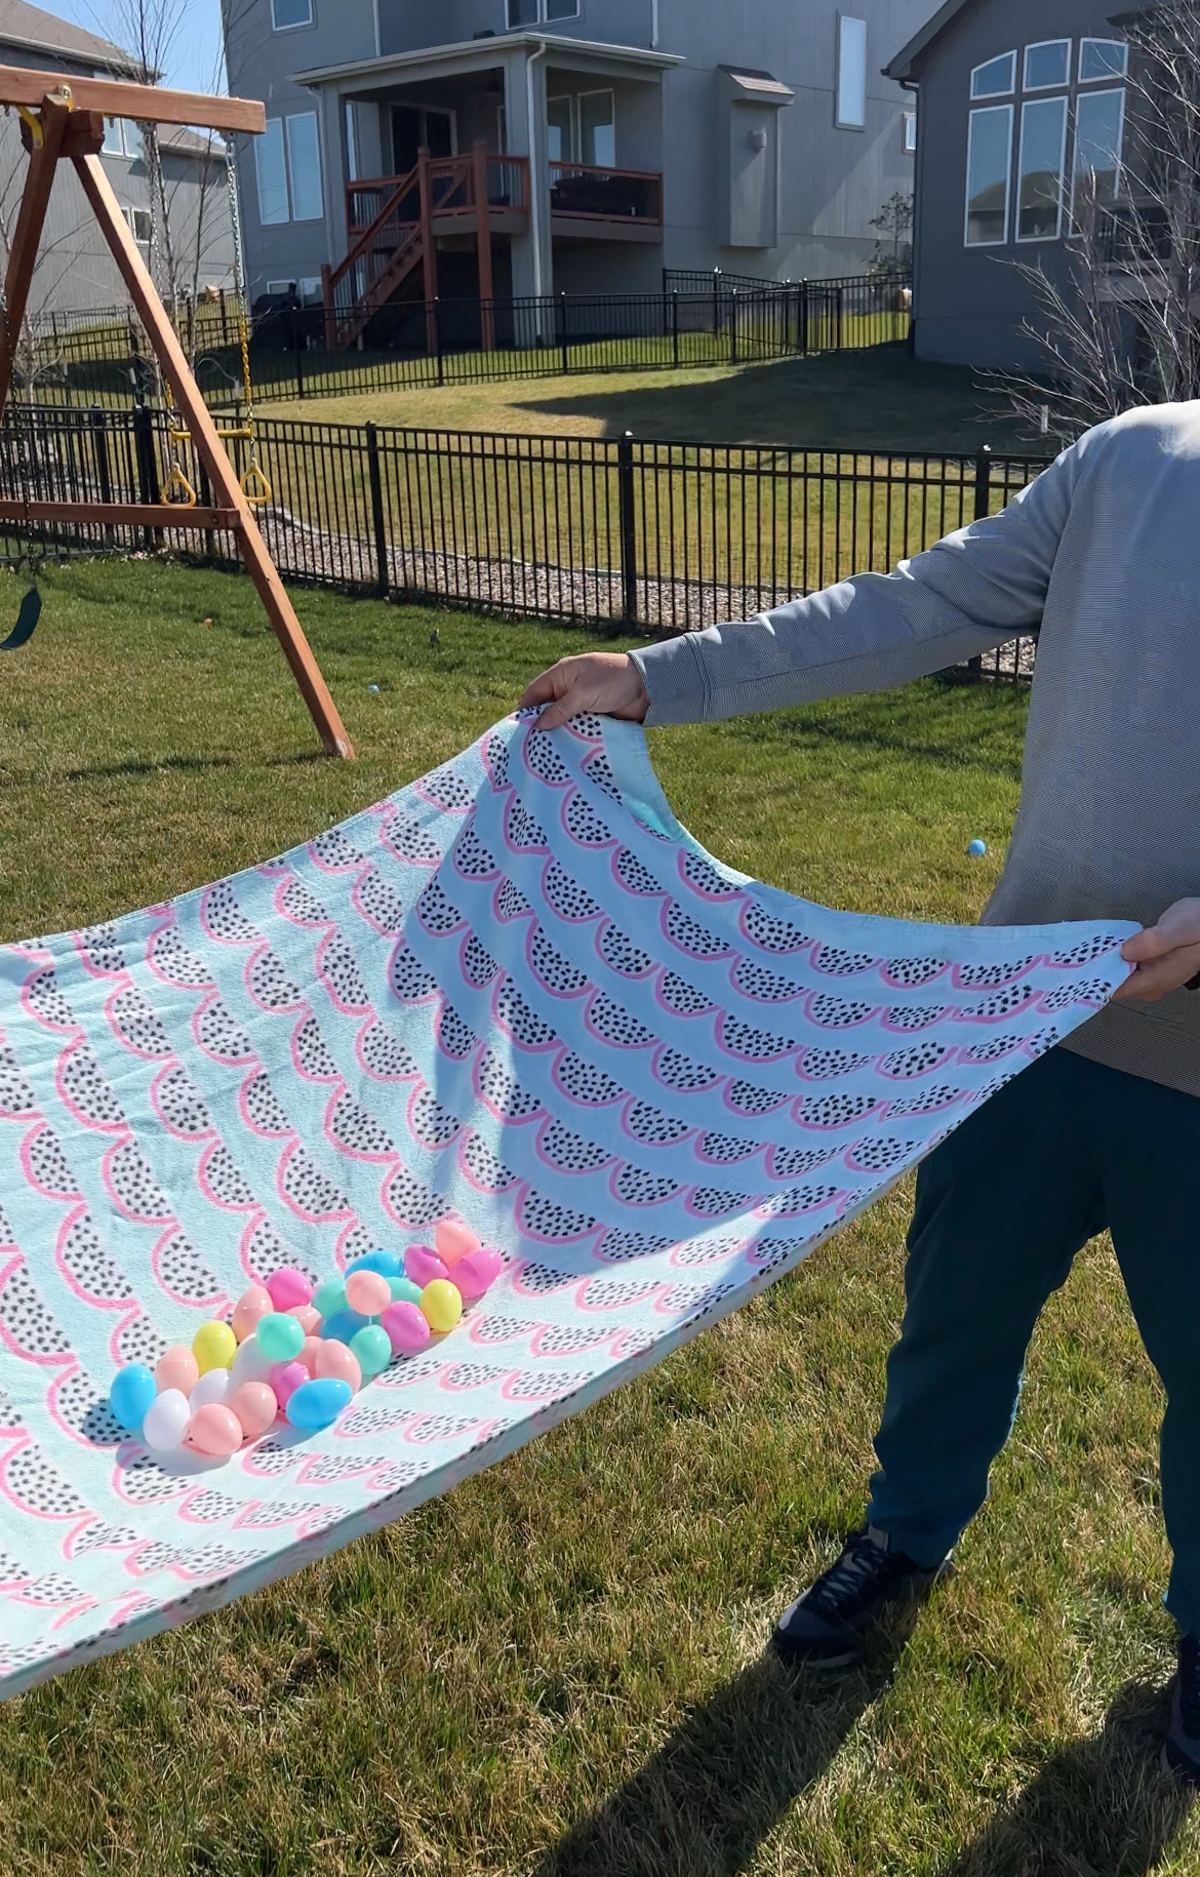 a bunch of plastic eggs in a beach towel for an egg toss